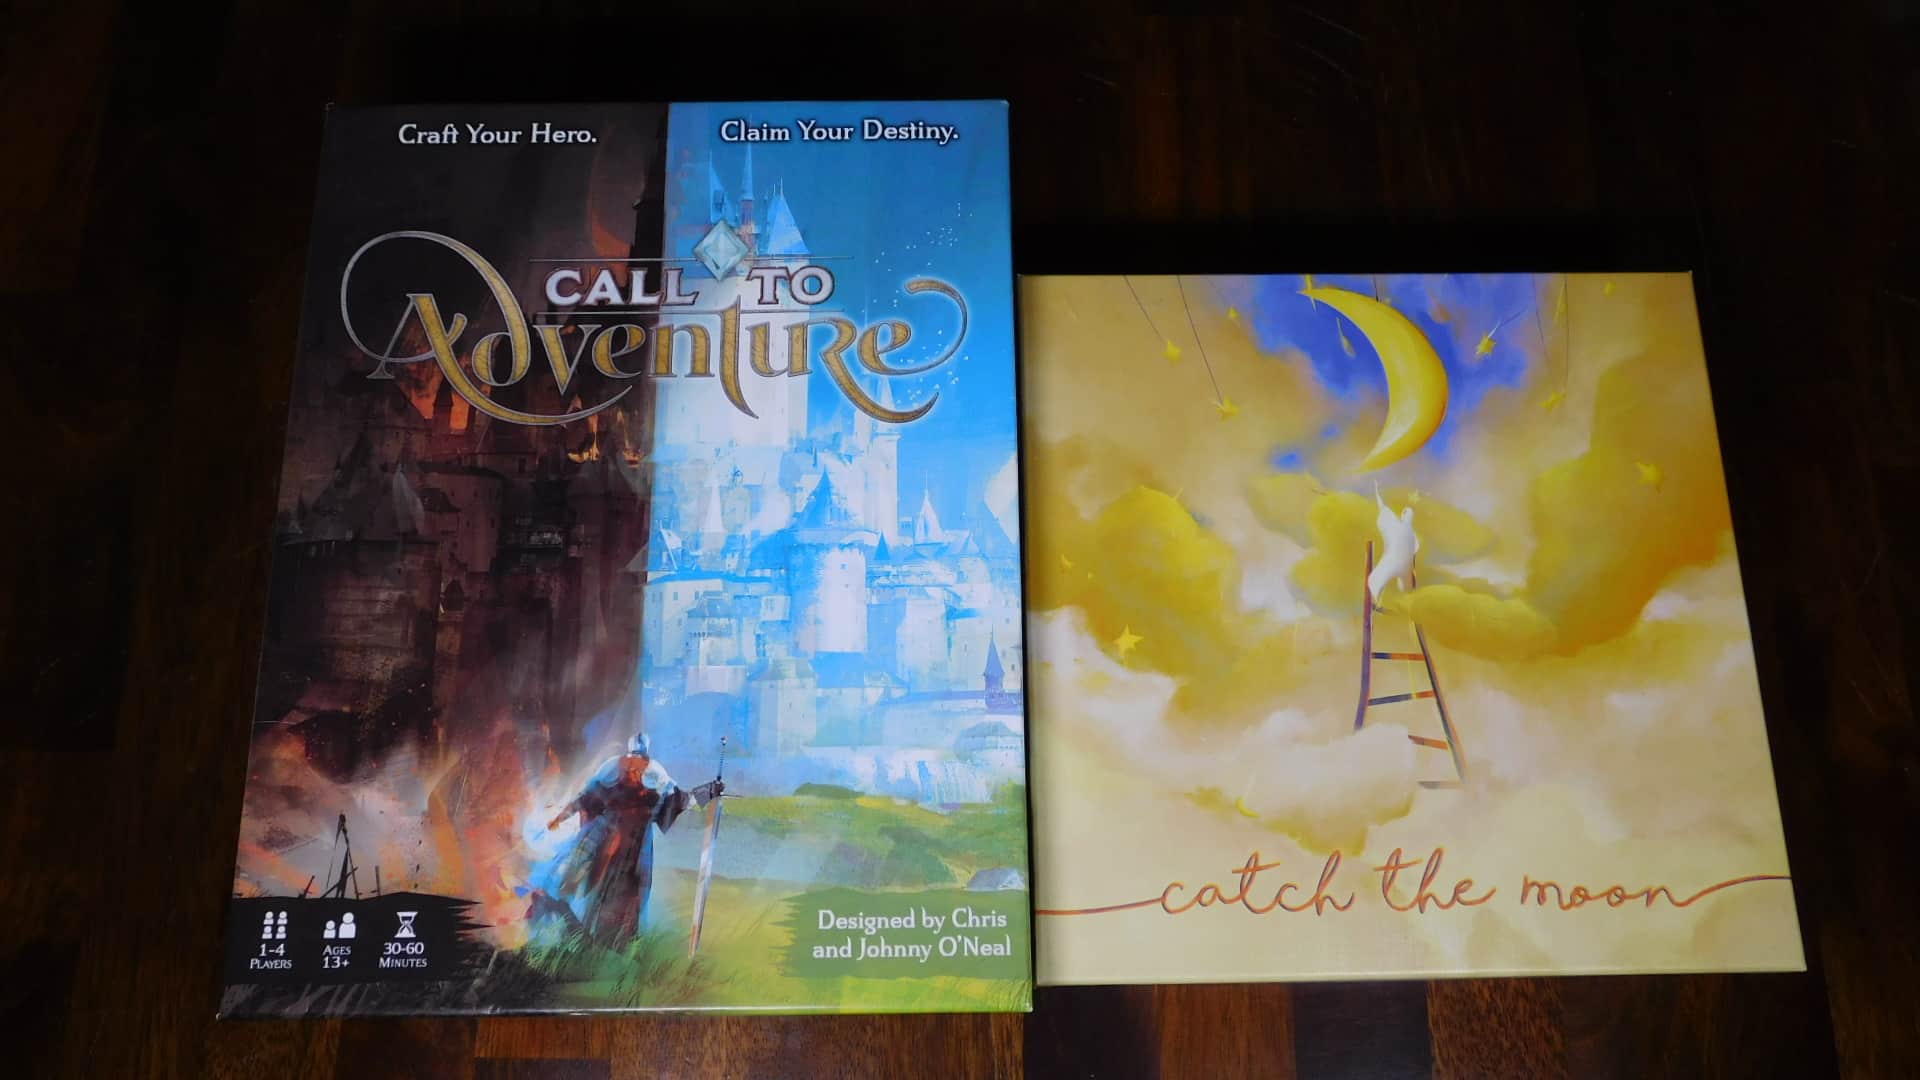 A closeup of the box covers for the games, Call To Adventure and Catch The Moon.